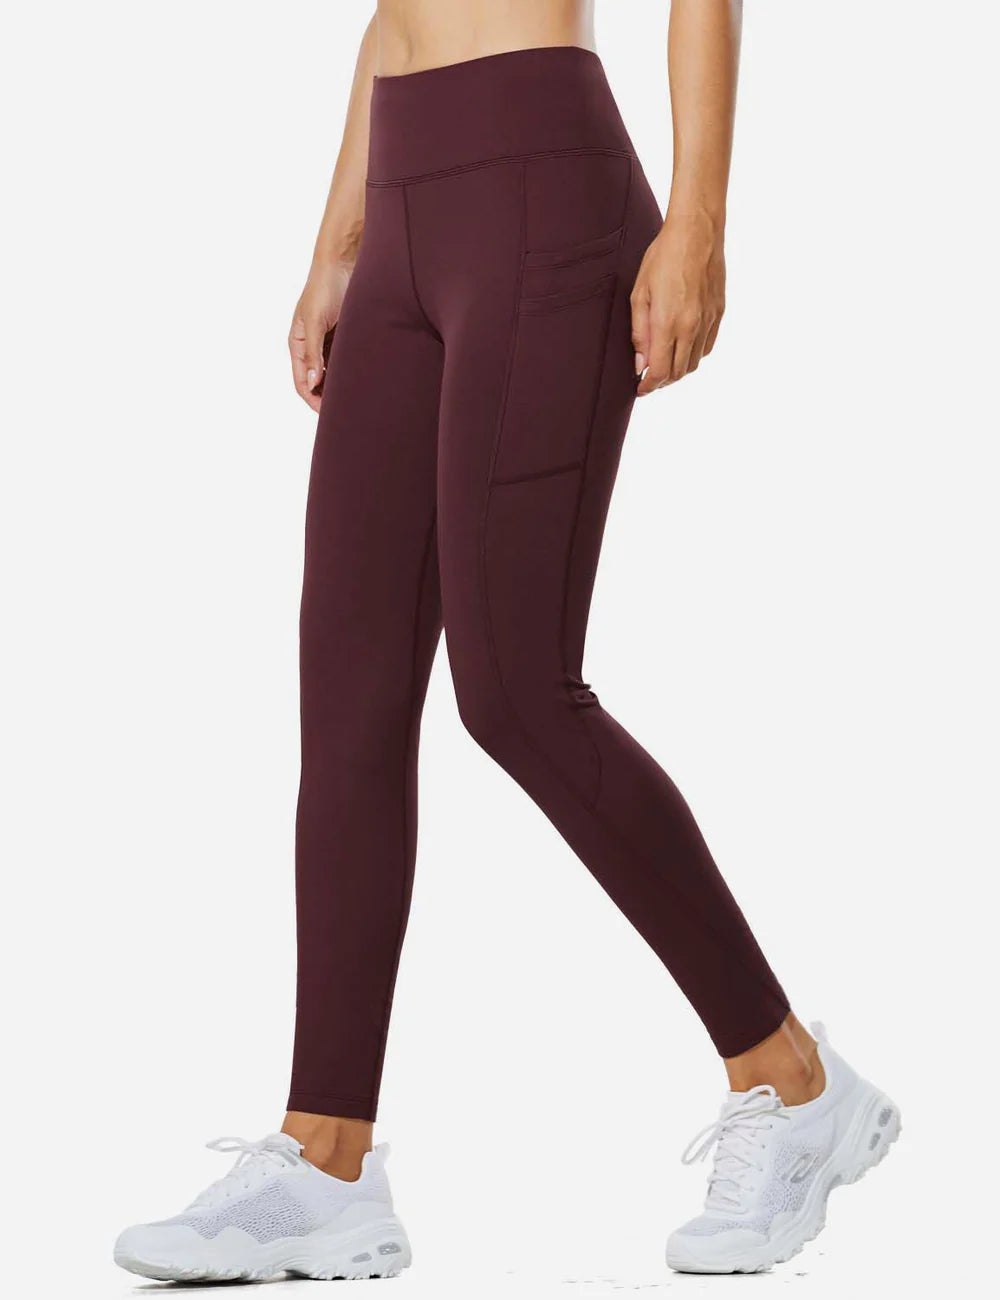 Are Leggings Appropriate For The Office? – solowomen